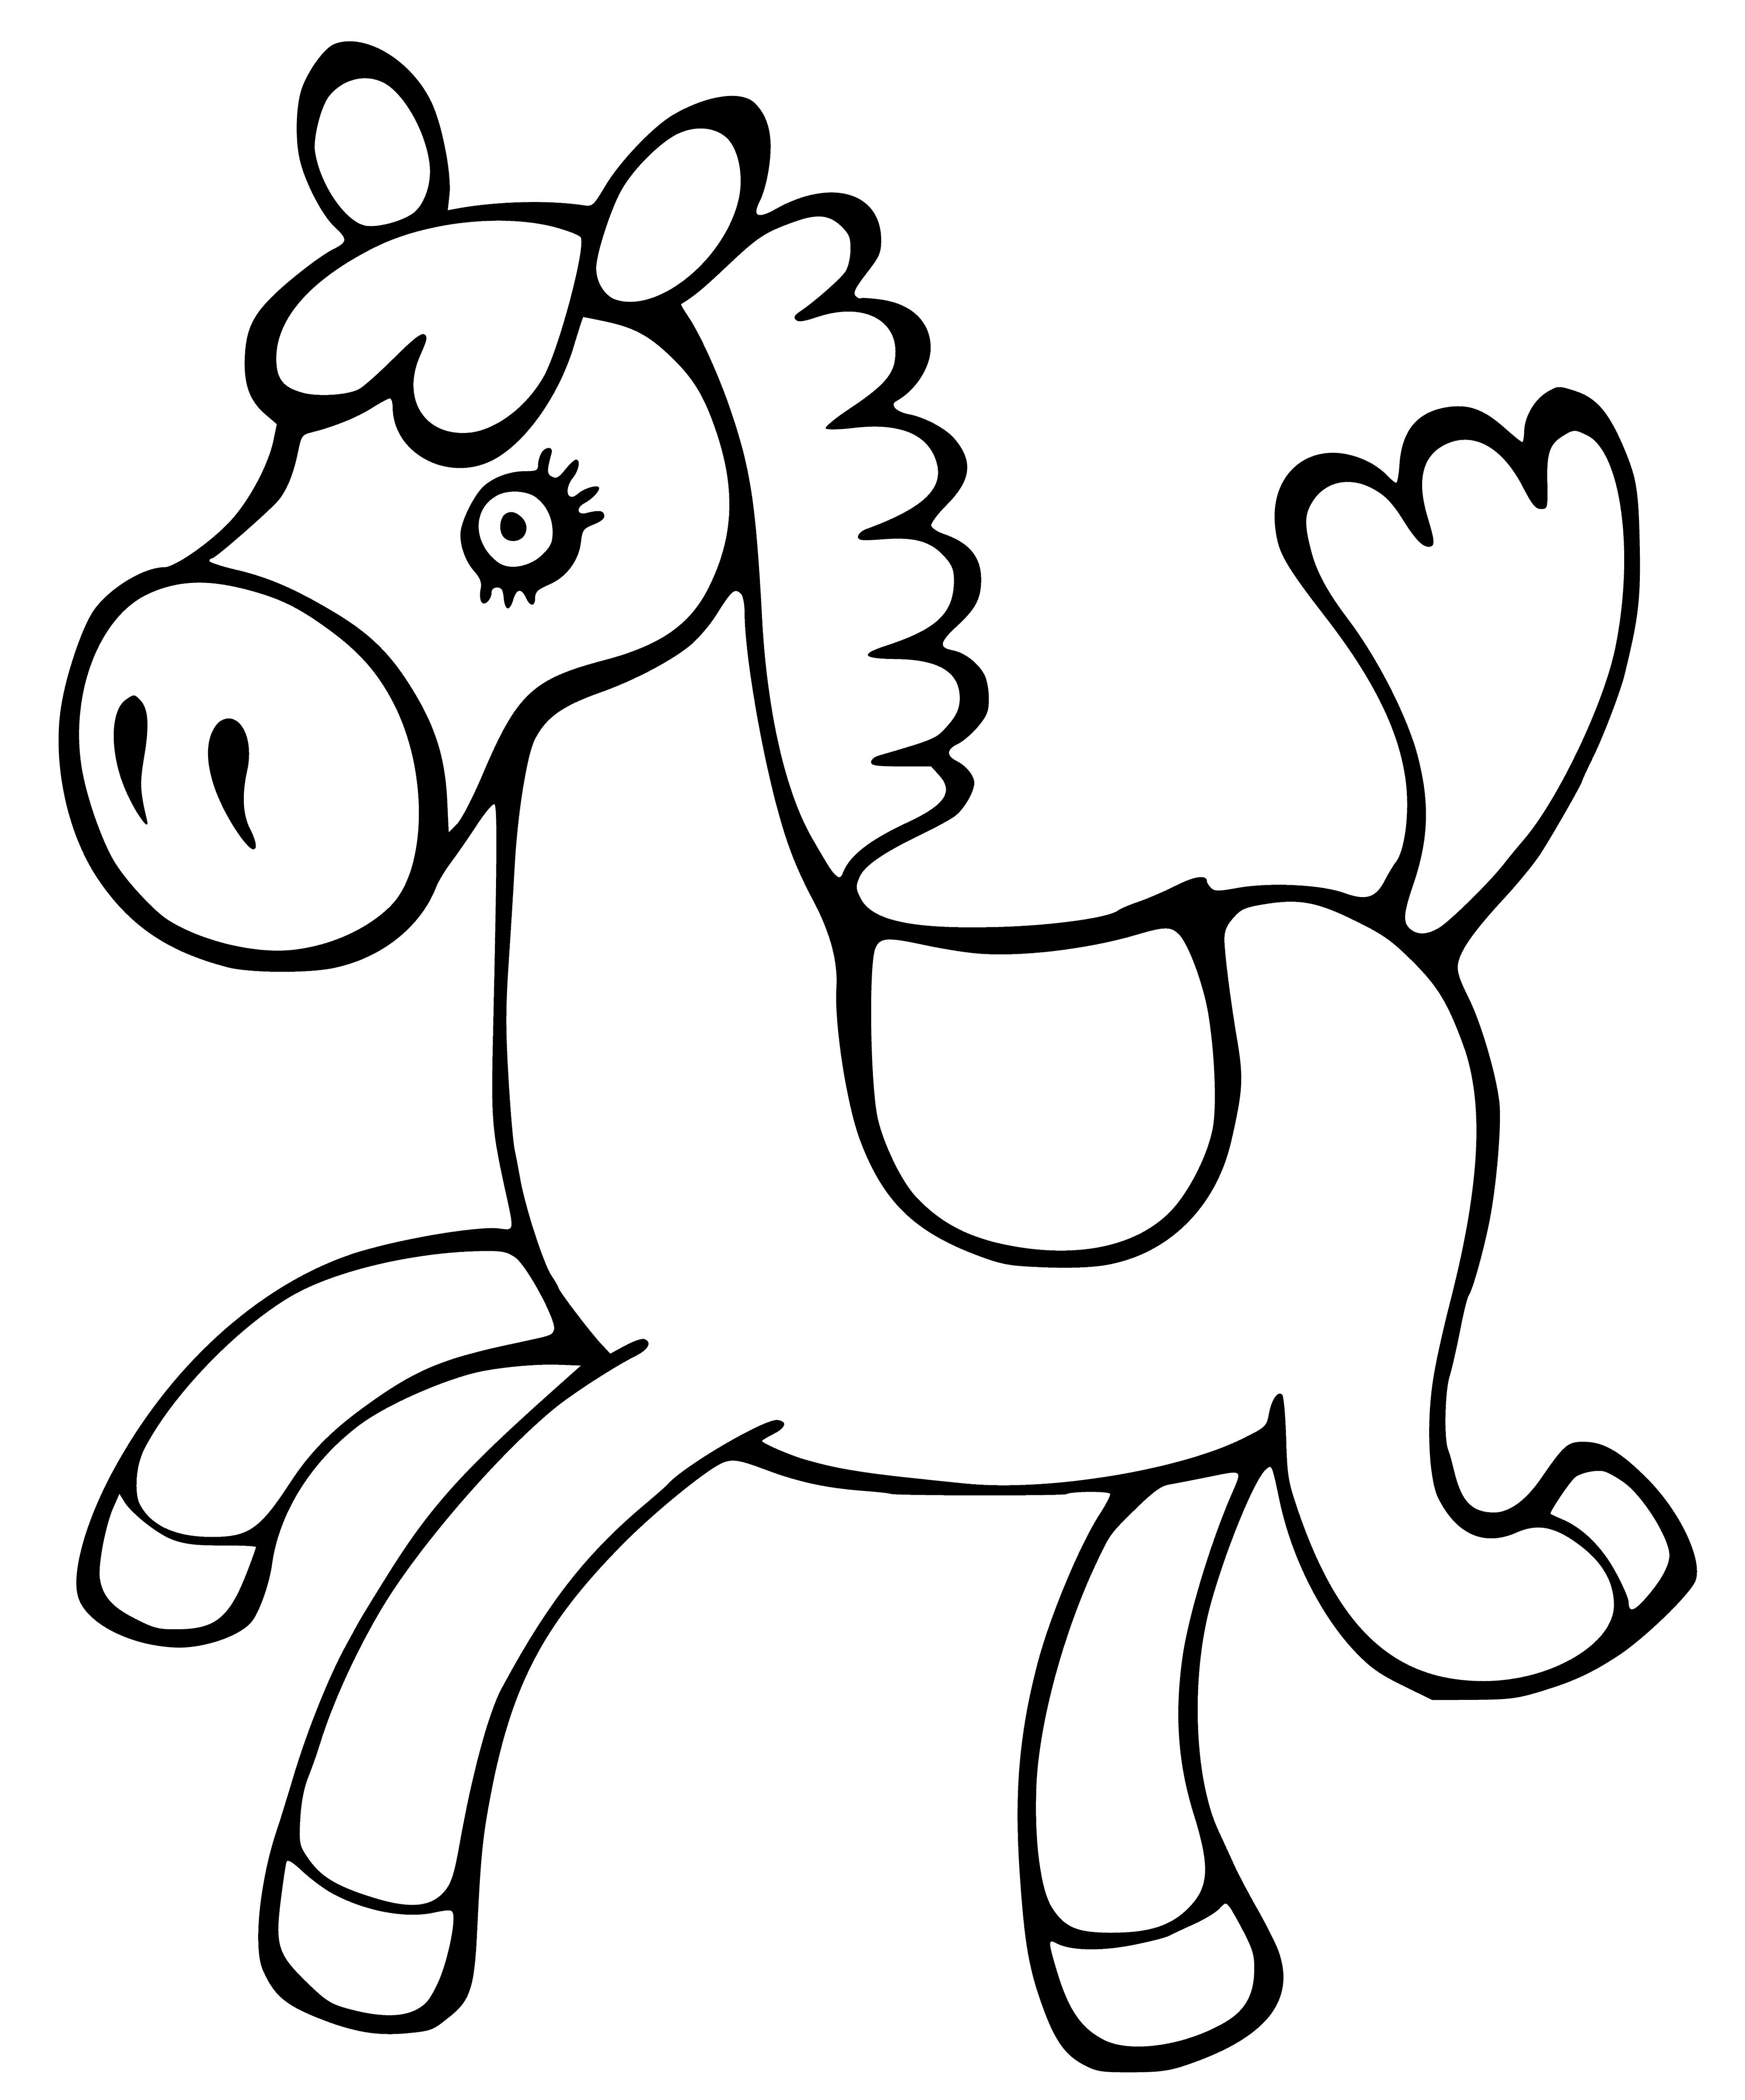 coloring page: A brown and white horse stands in a field in a coloring page. #coloring #horse #kidsactivities